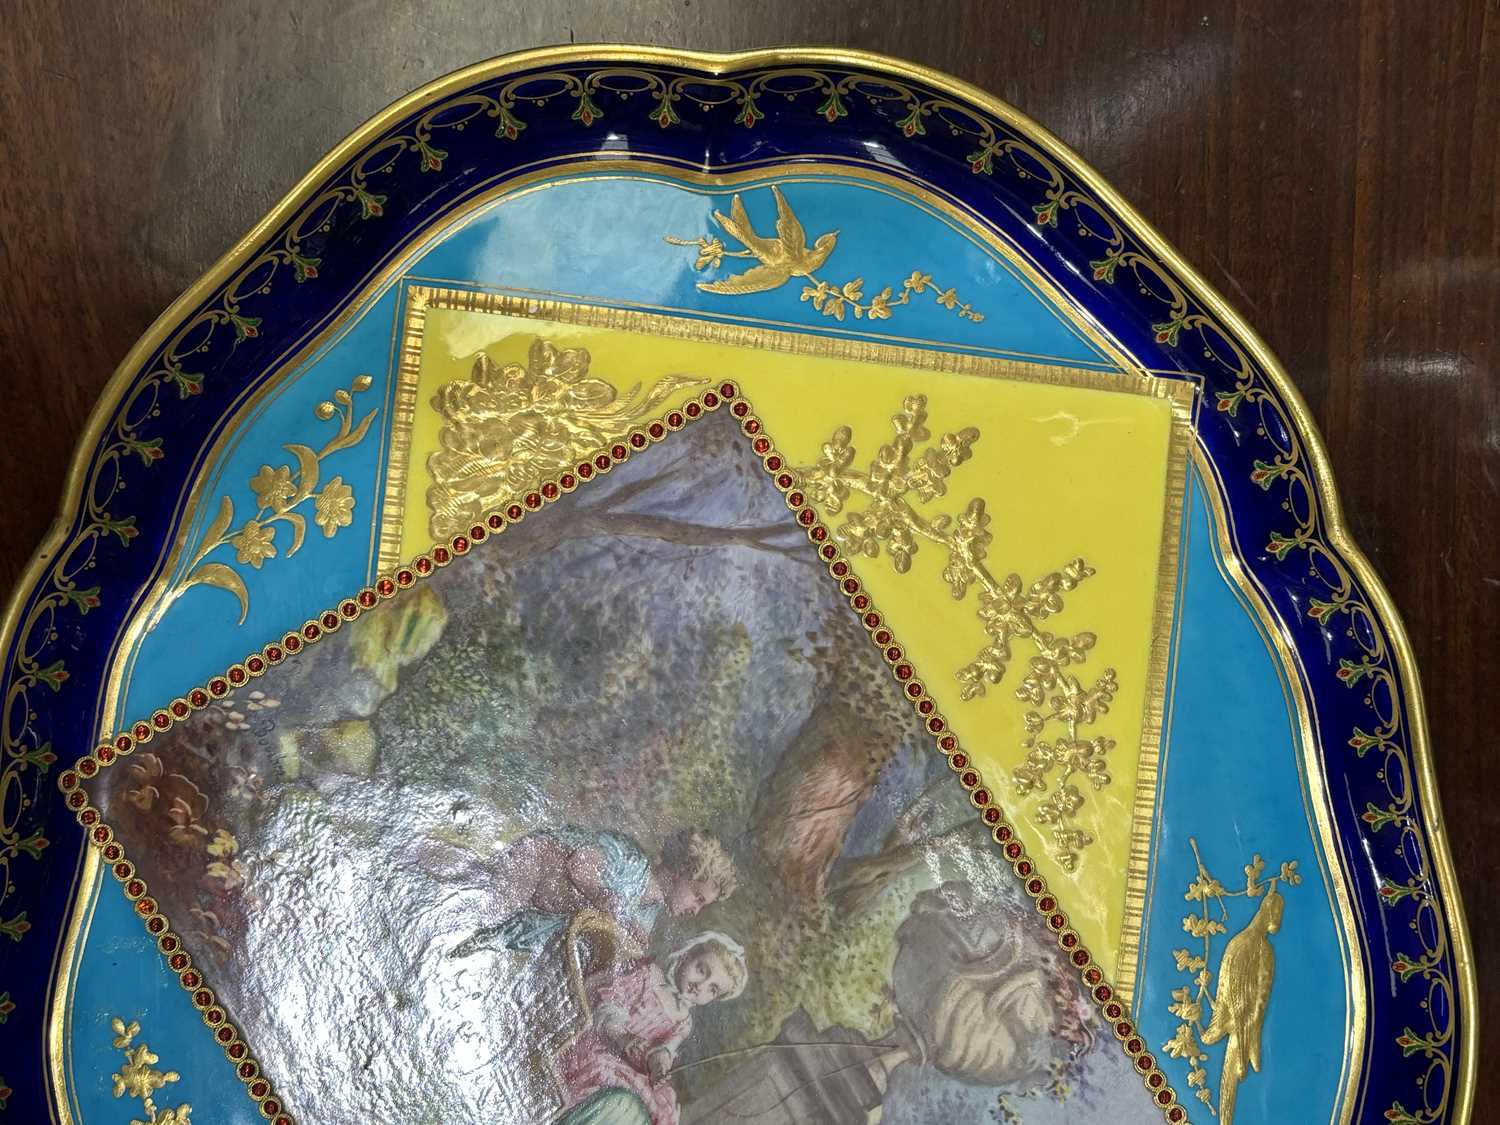 A FINE SÈVRES STYLE TRAY, LATE 19TH CENTURY - Image 5 of 6